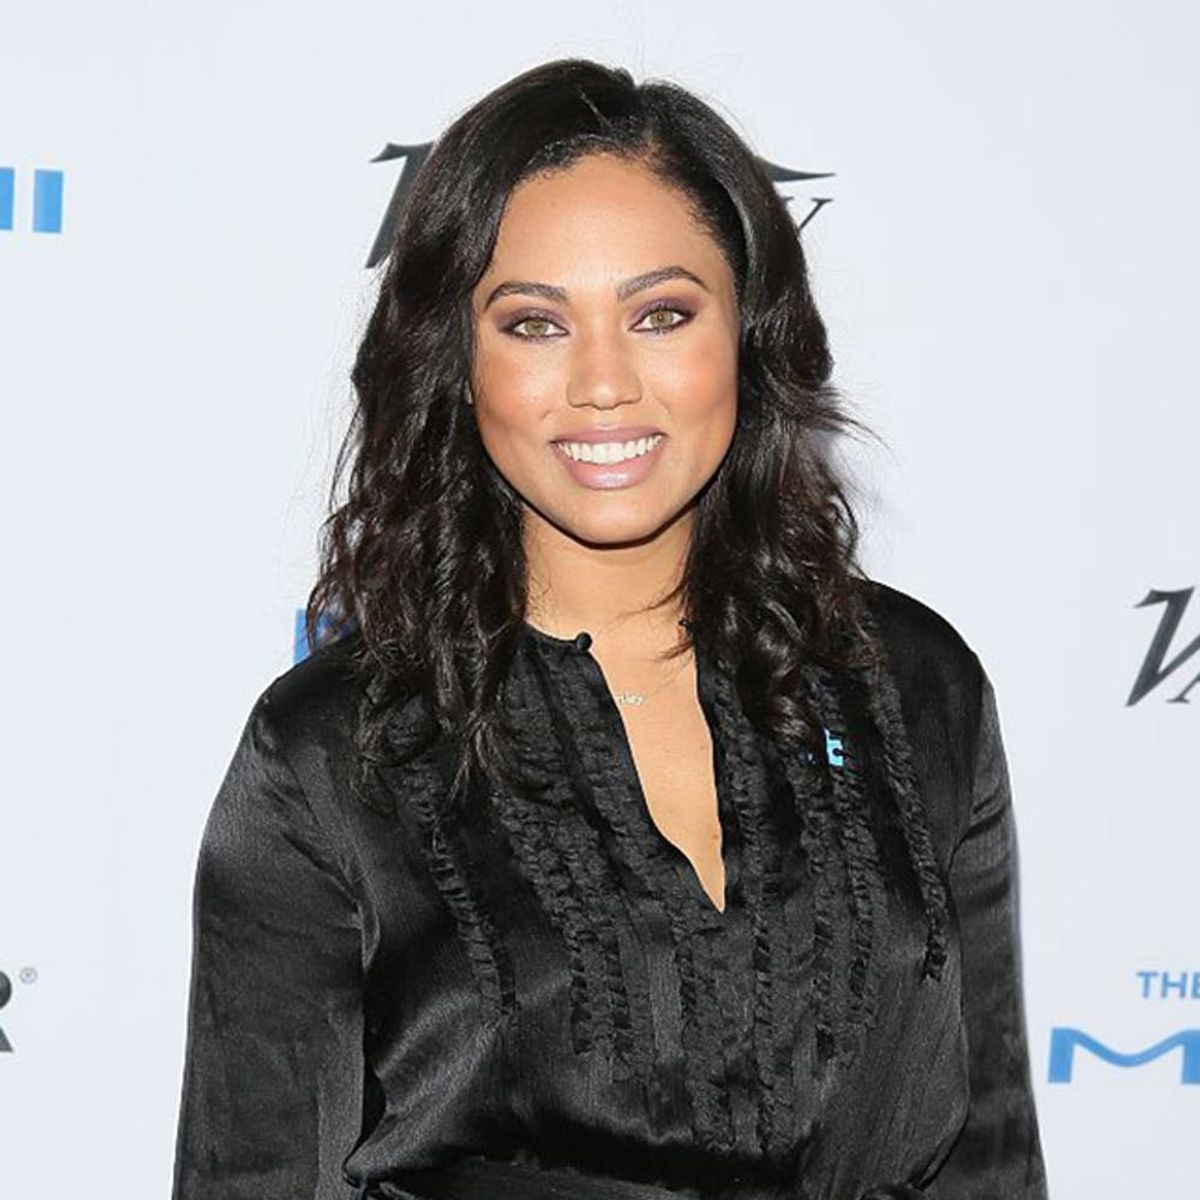 6 Things You Learn About Ayesha Curry from Spending a Day With Her